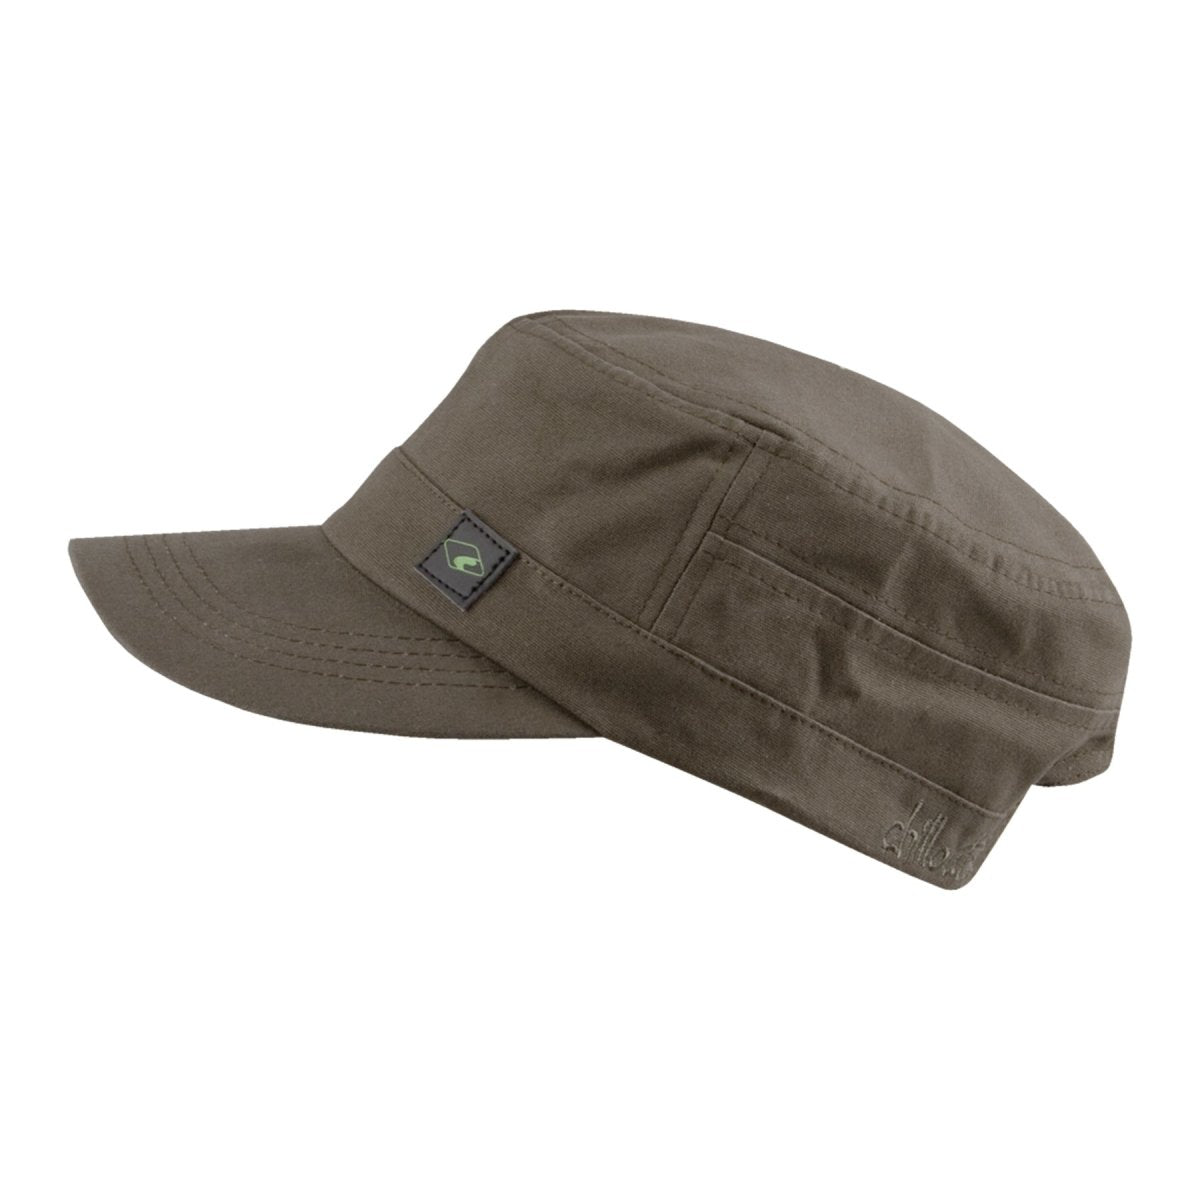 buy - – colors in Headwear cotton of natural made online Military Chillouts cap now!